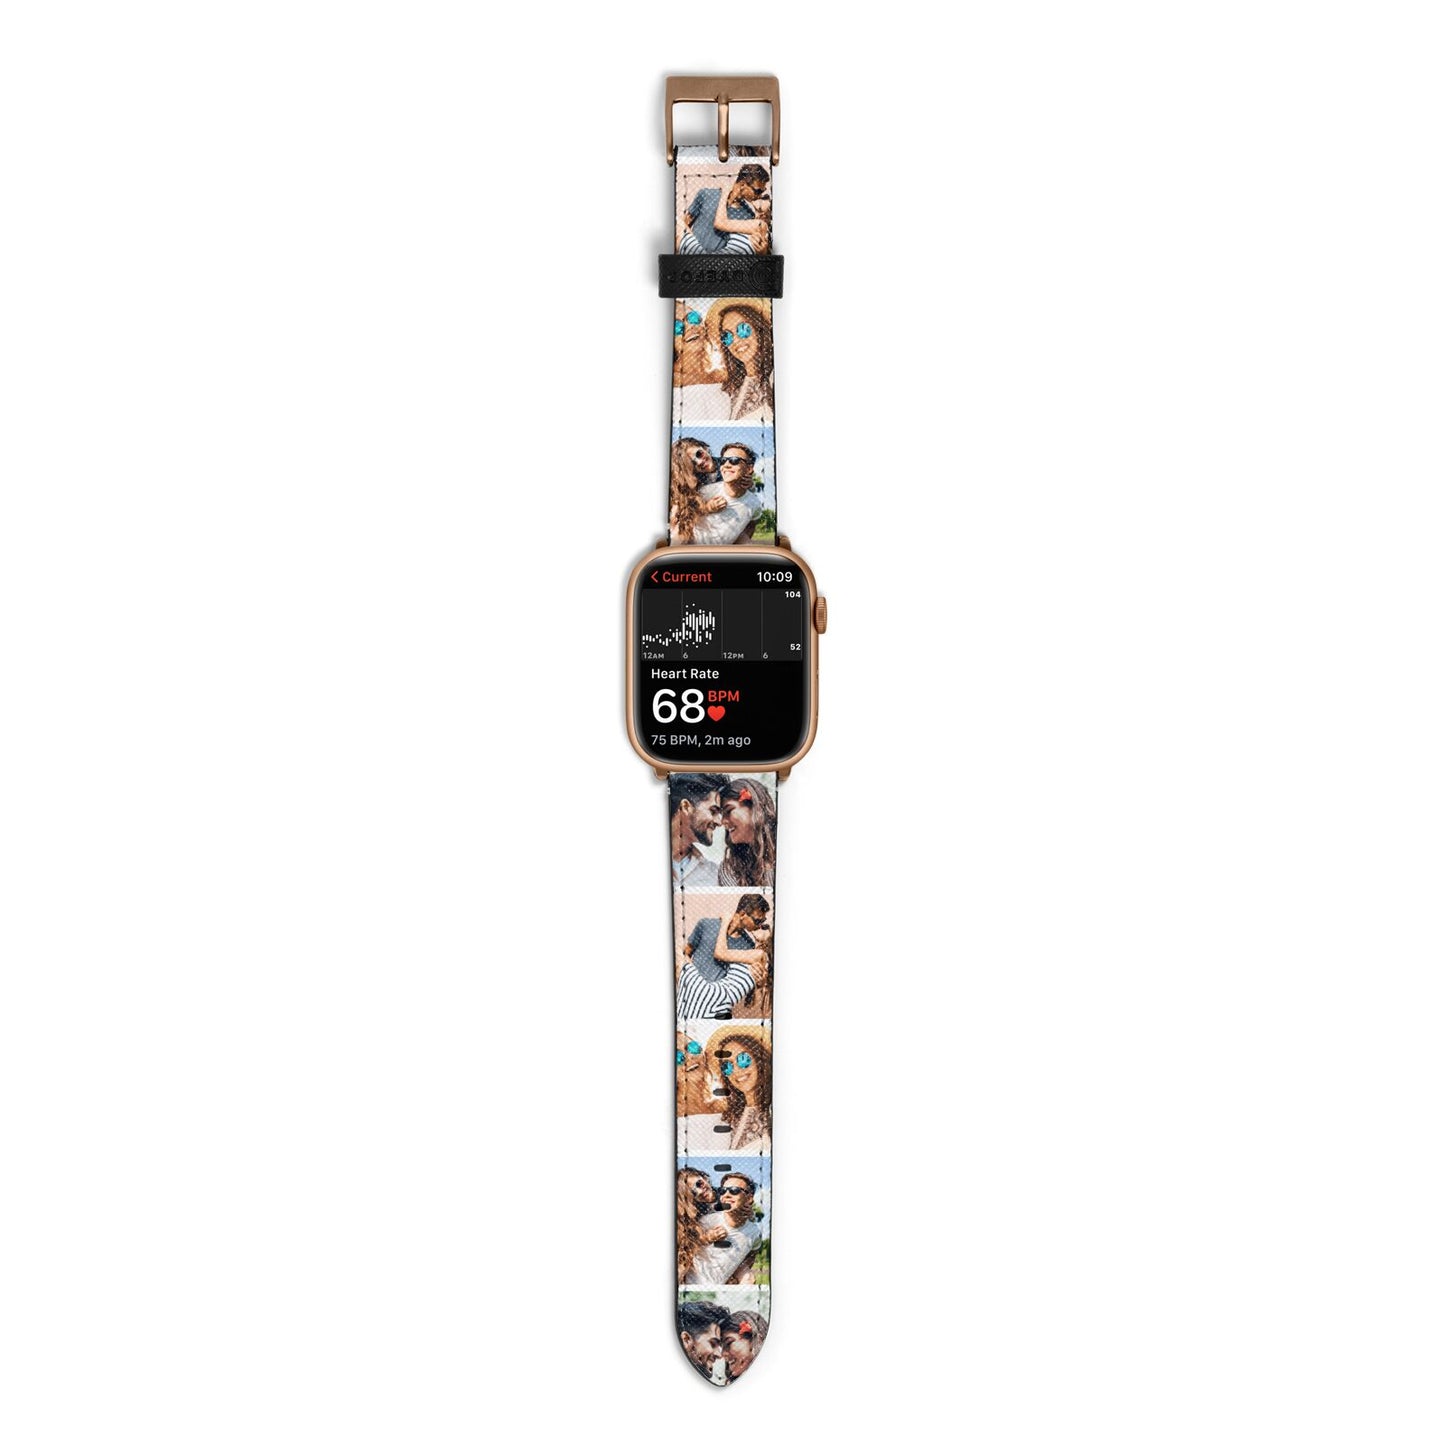 Photo Strip Montage Upload Apple Watch Strap Size 38mm with Gold Hardware